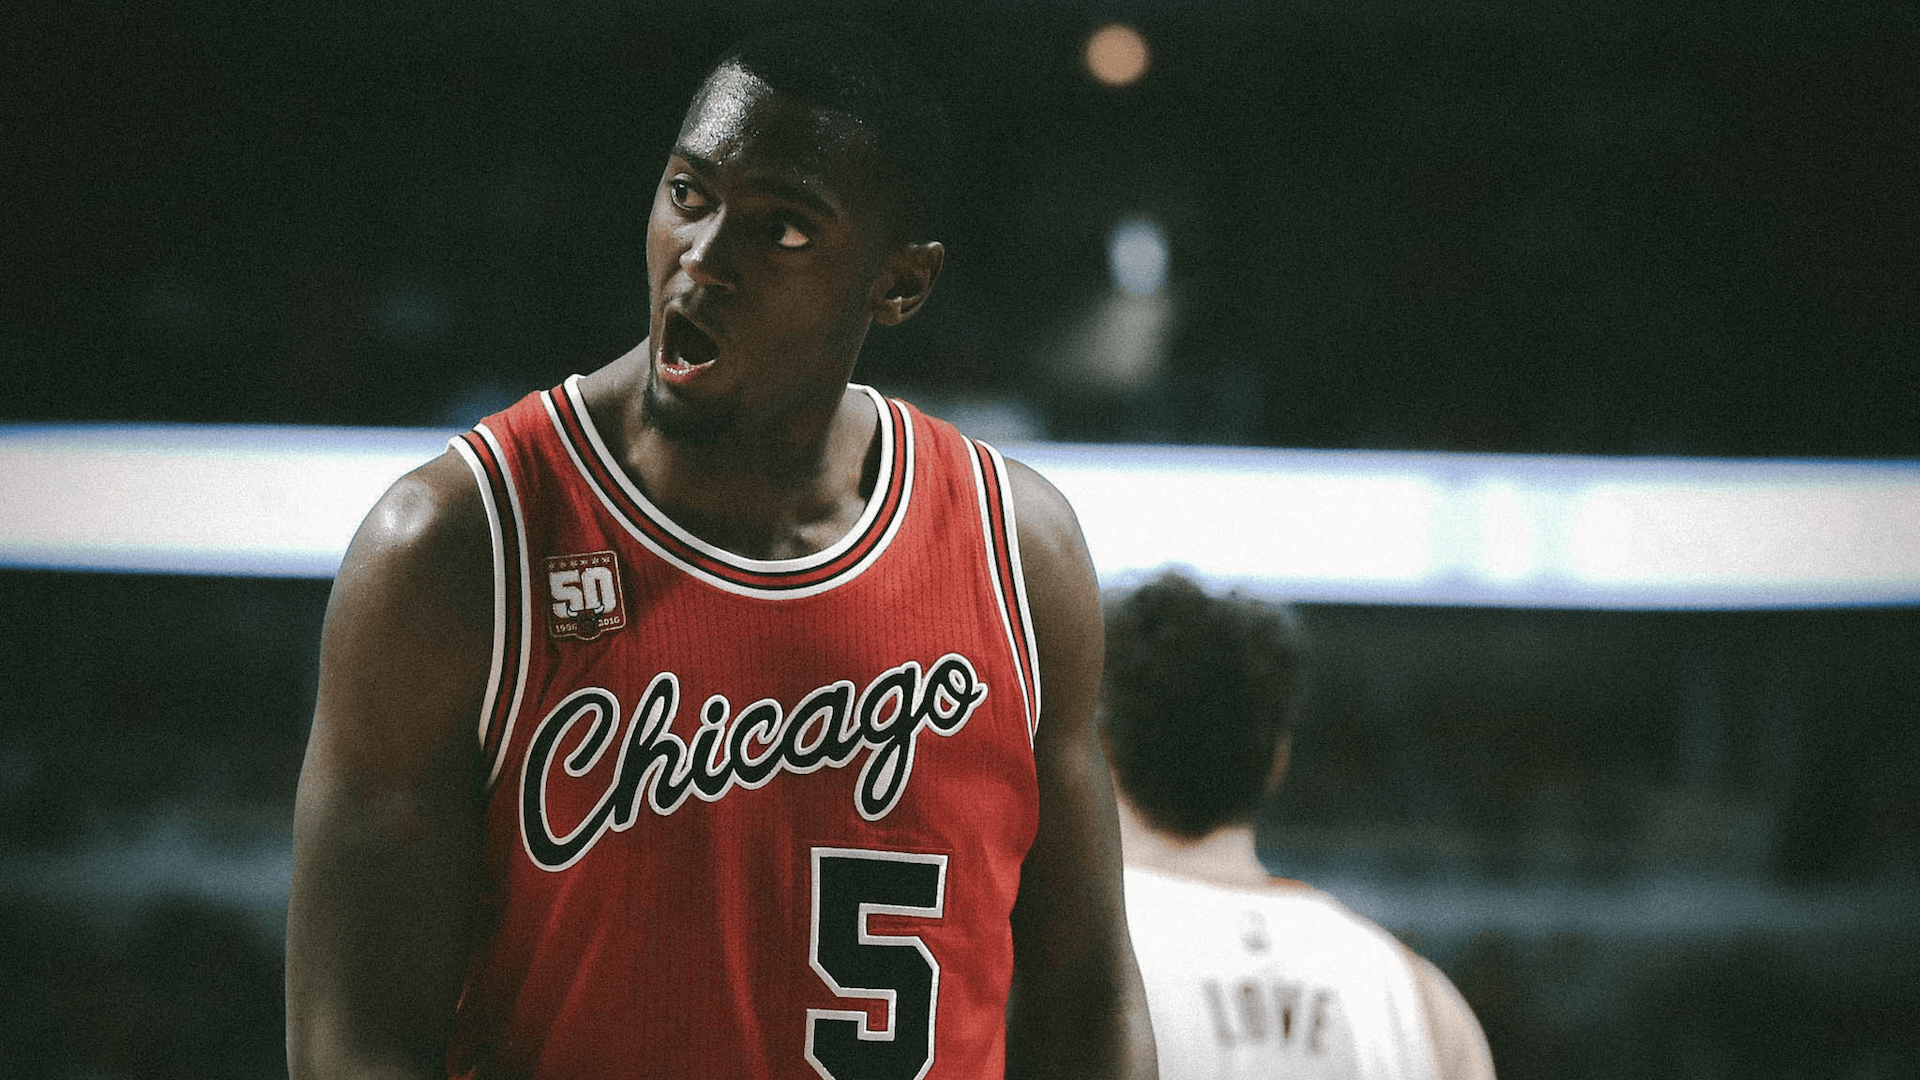 Can Bobby Portis Ever Play For the Bulls Again?